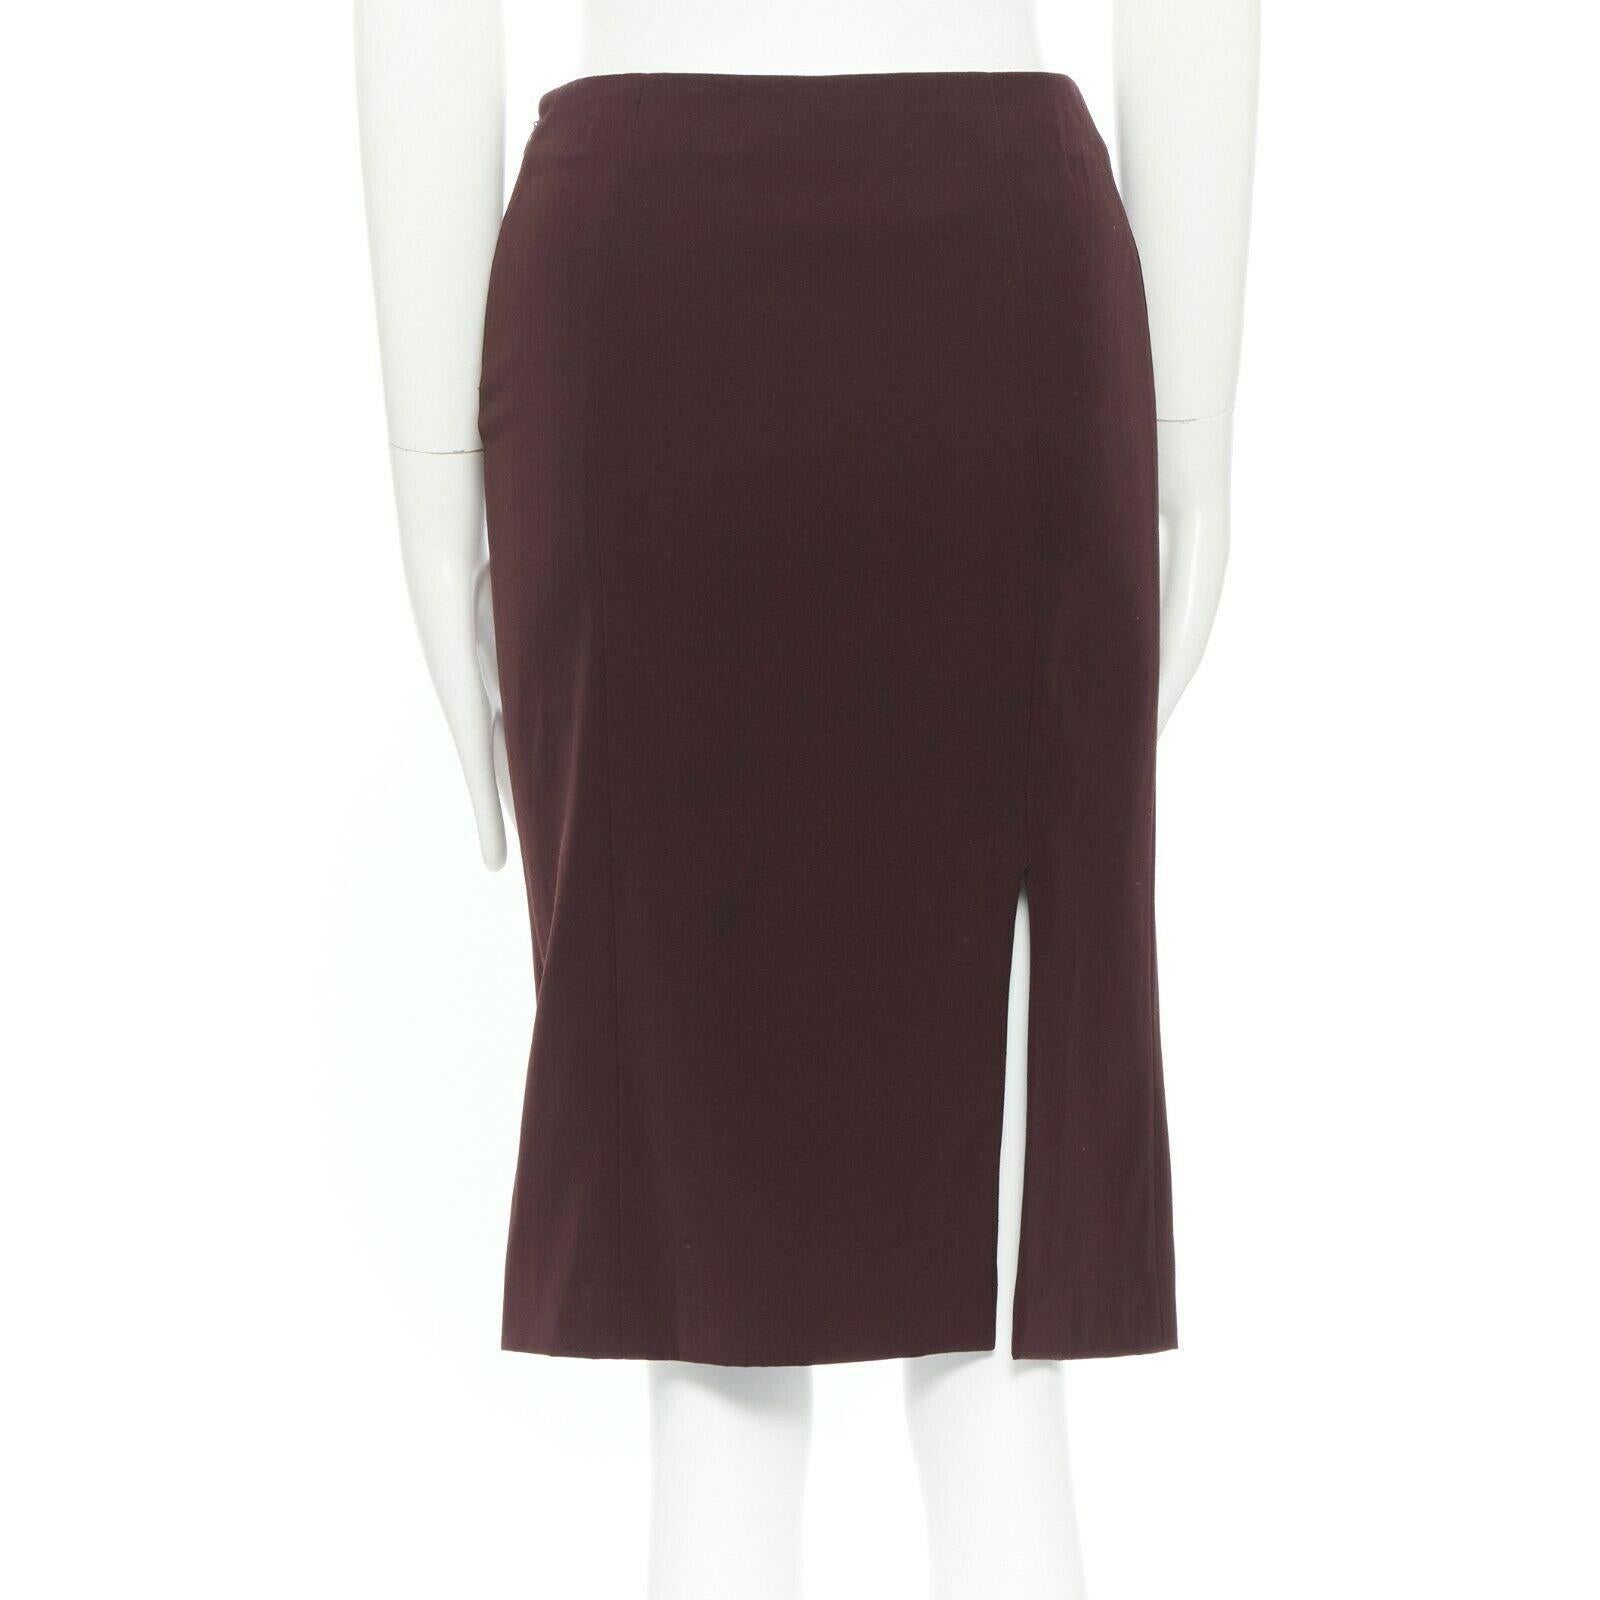 NARCISO RODRIGUEZ 100% virgin wool high waist knee length pencil skirt IT38 
Reference: LNKO/A01182 
Brand: Narciso Rodriguez 
Designer: Narciso Rodriguez 
Material: Virgin Wool 
Color: Brown 
Pattern: Solid 
Closure: Zip 
Extra Detail: Pencil